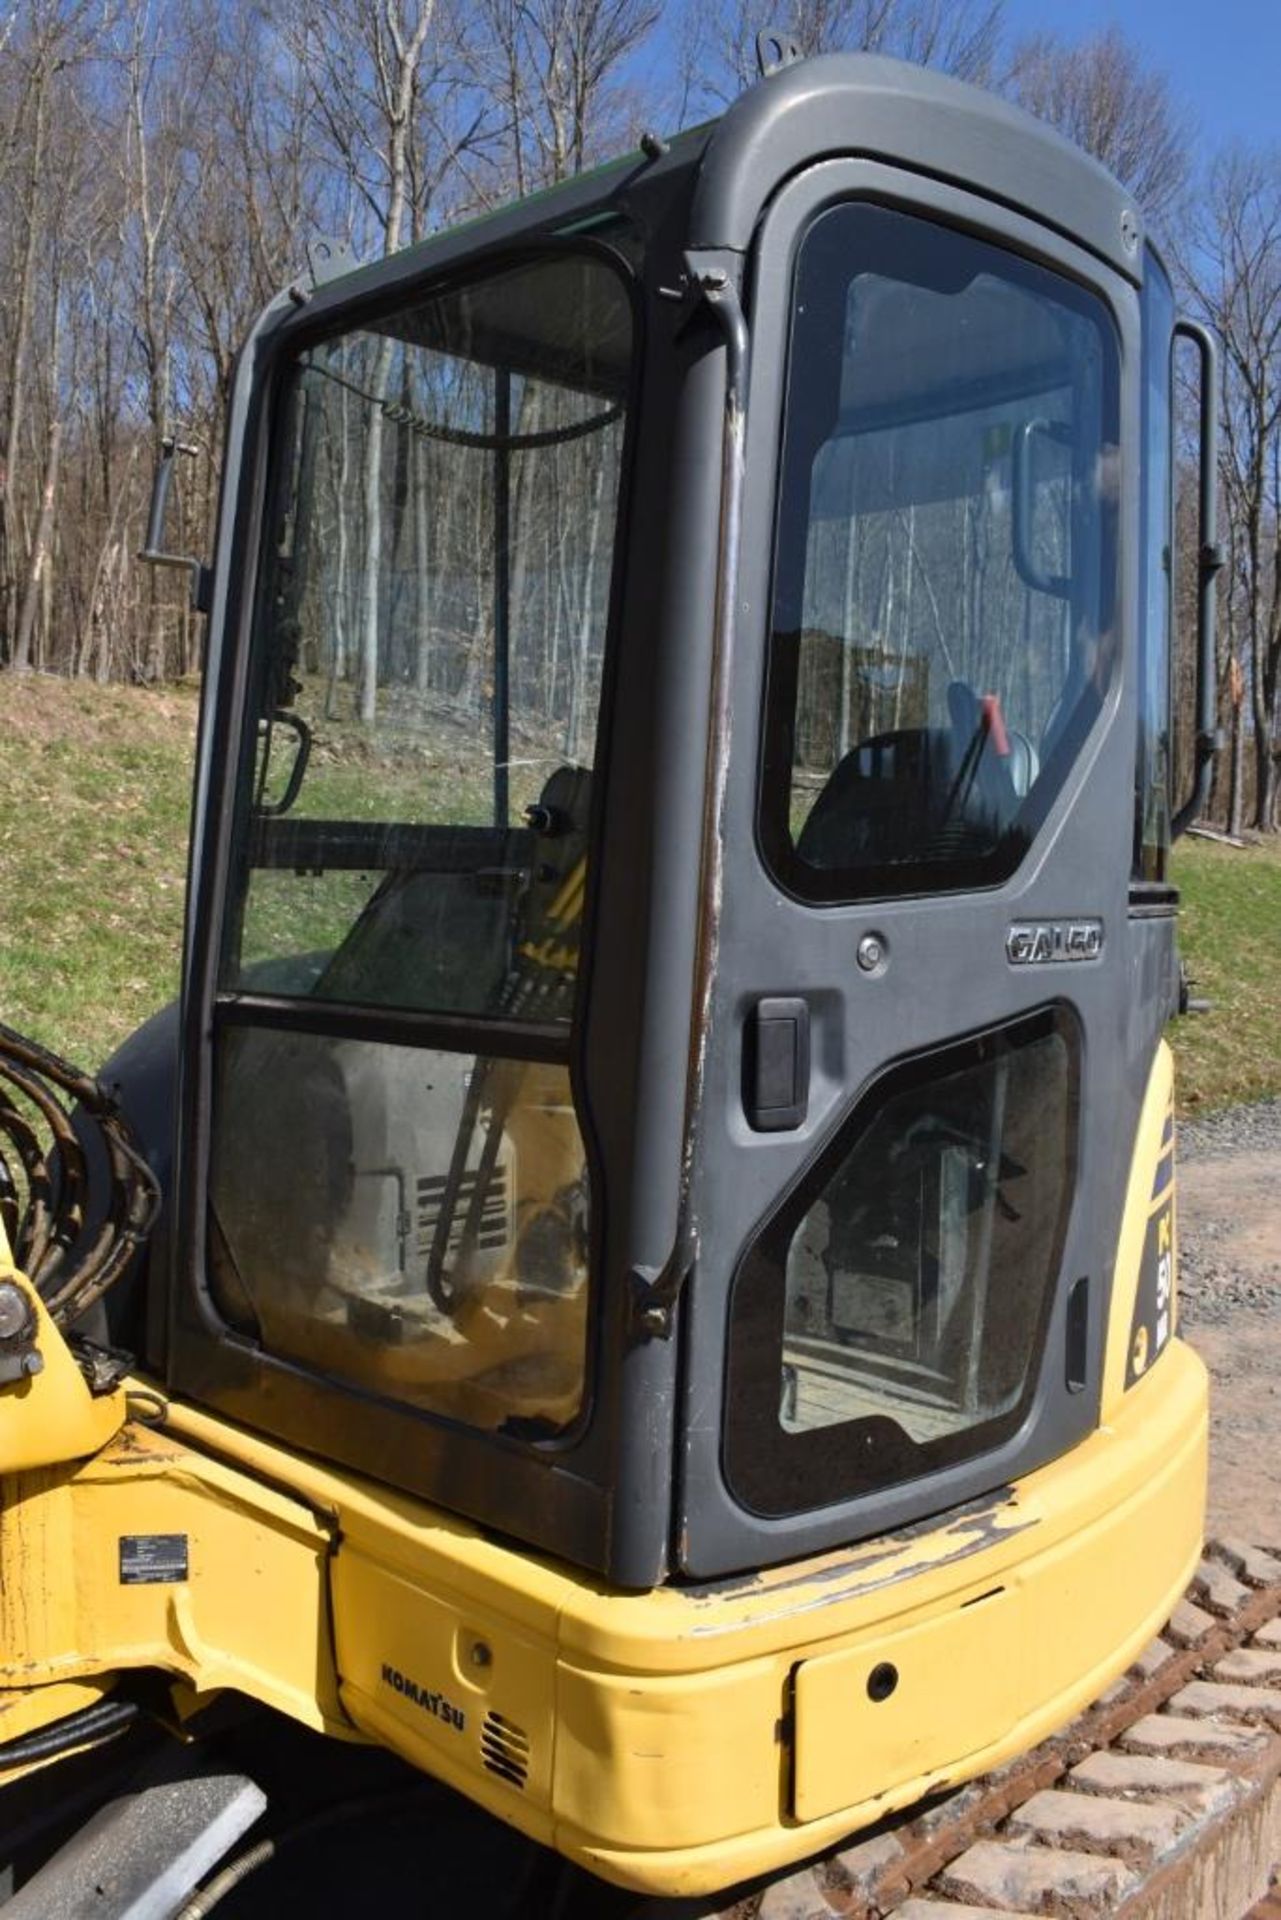 Komatsu PC50MR-2 Excavator 6643 Hours, Runs and Operates, WB 24" Bucket, WB Quick Coupler, Auxiliary - Image 38 of 44